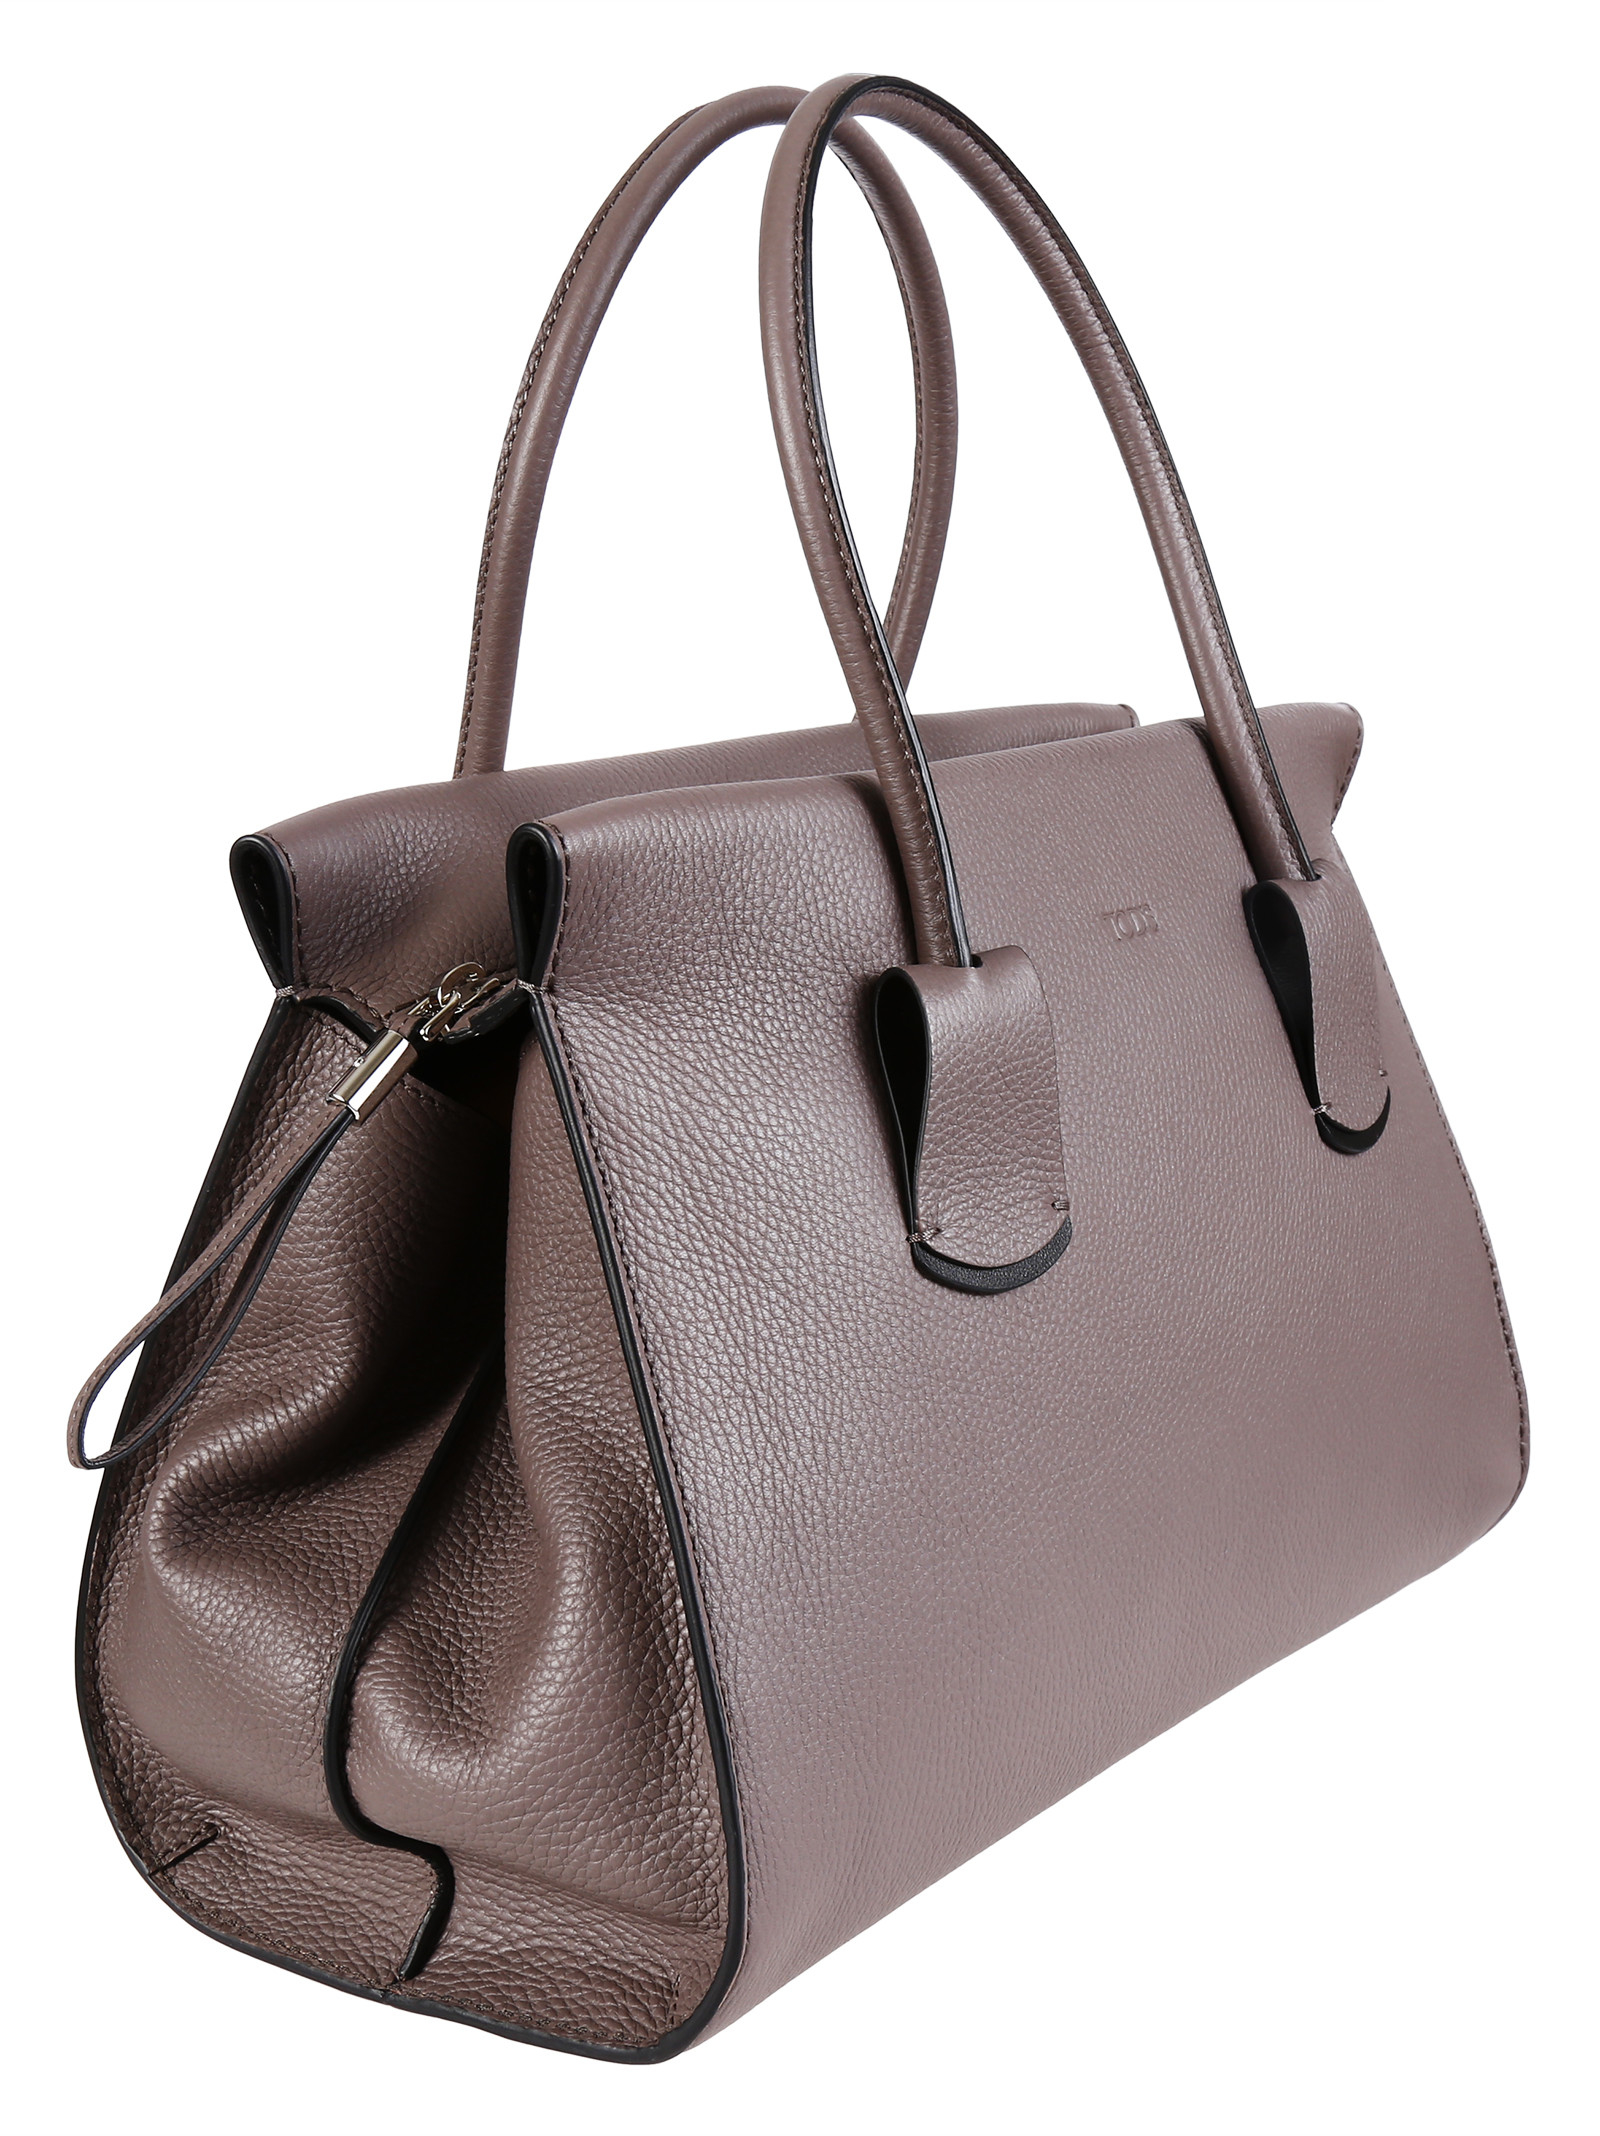 Tod's Tods Small Bowler Bag In Micrograin Textured Leather Stamped Tods ...